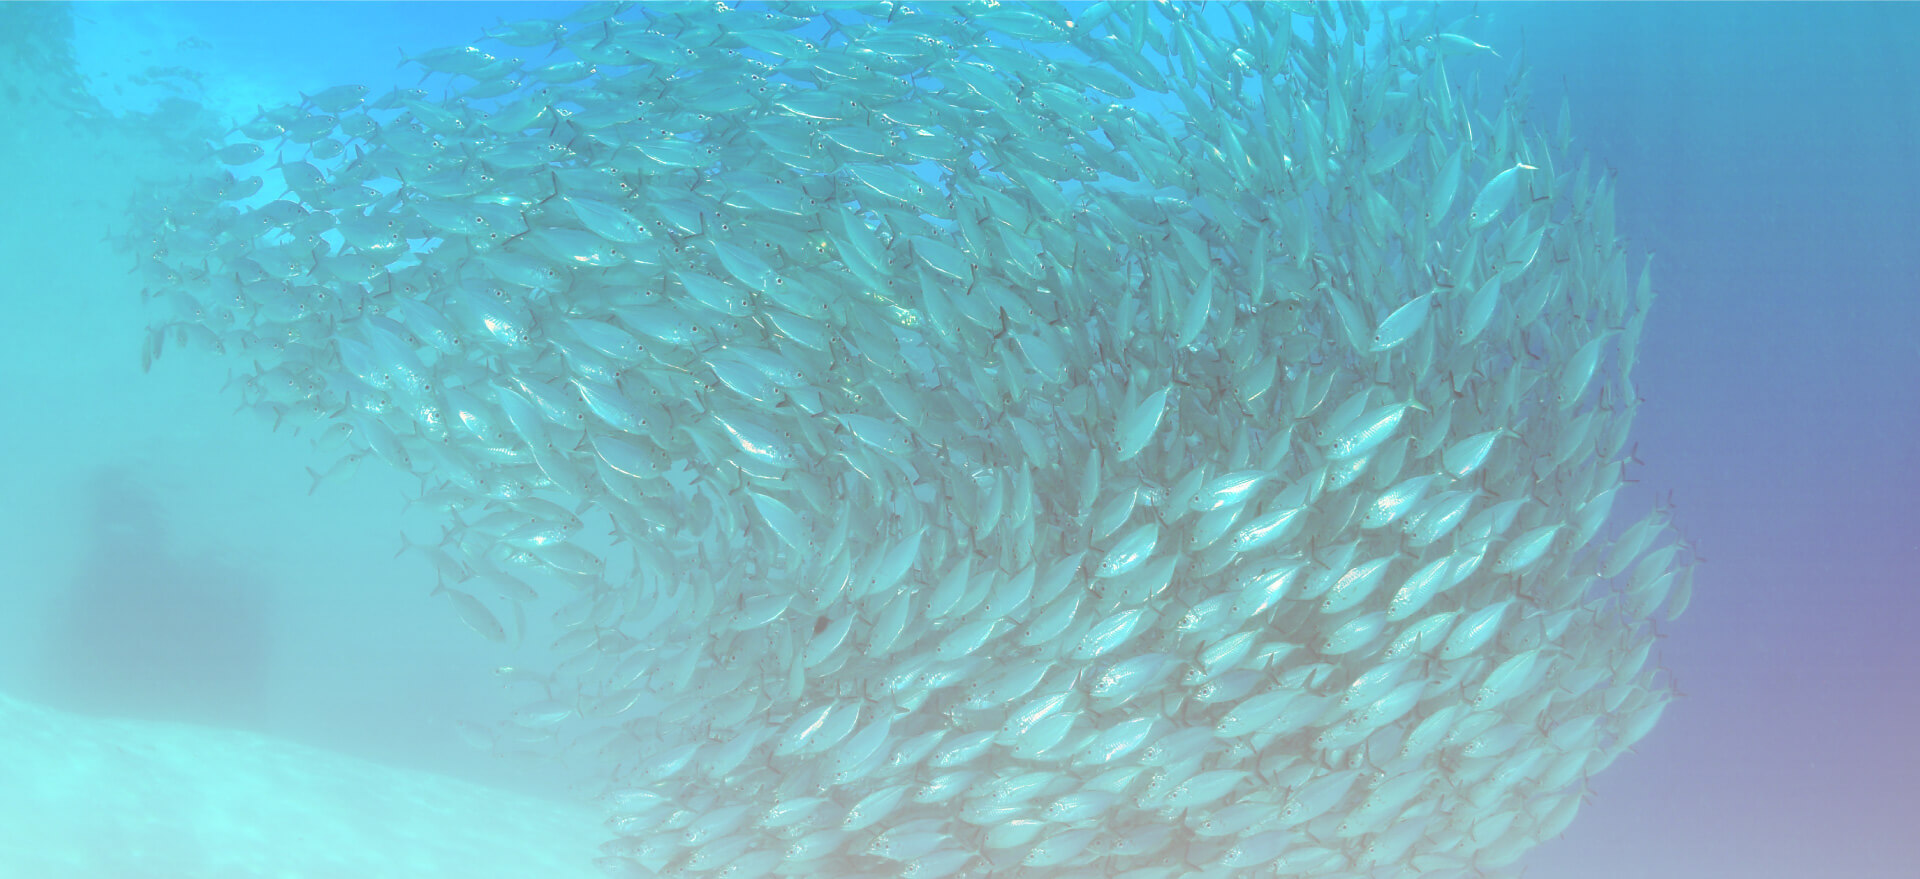 school of fish swimming in tropical waters